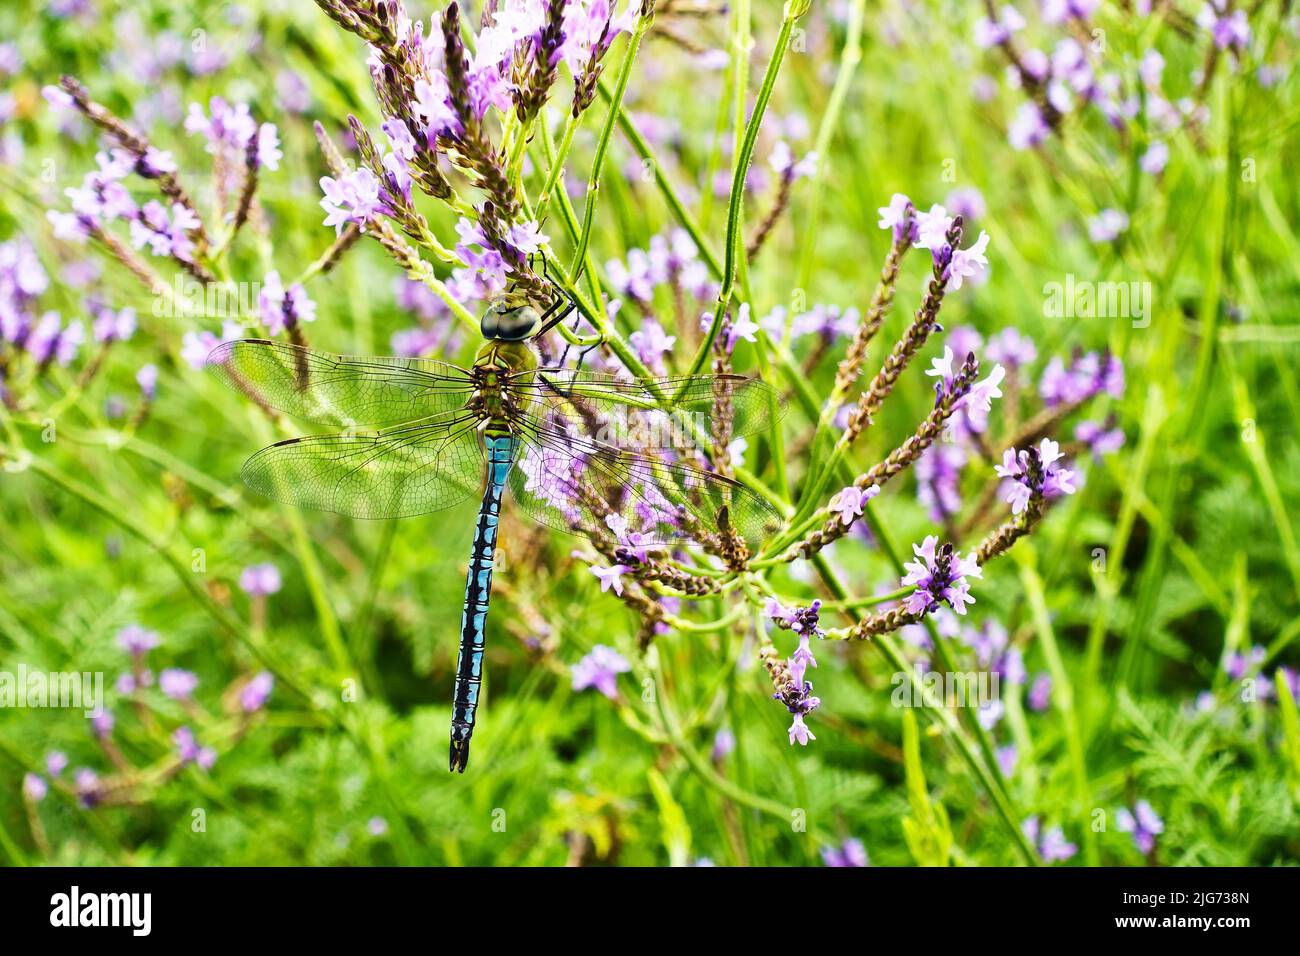 Green and turquoise dragonfly resting on Lavandula canariensis or canarian lavender flowers, Tenerife, Canary Islands, Spain. Stock Photo